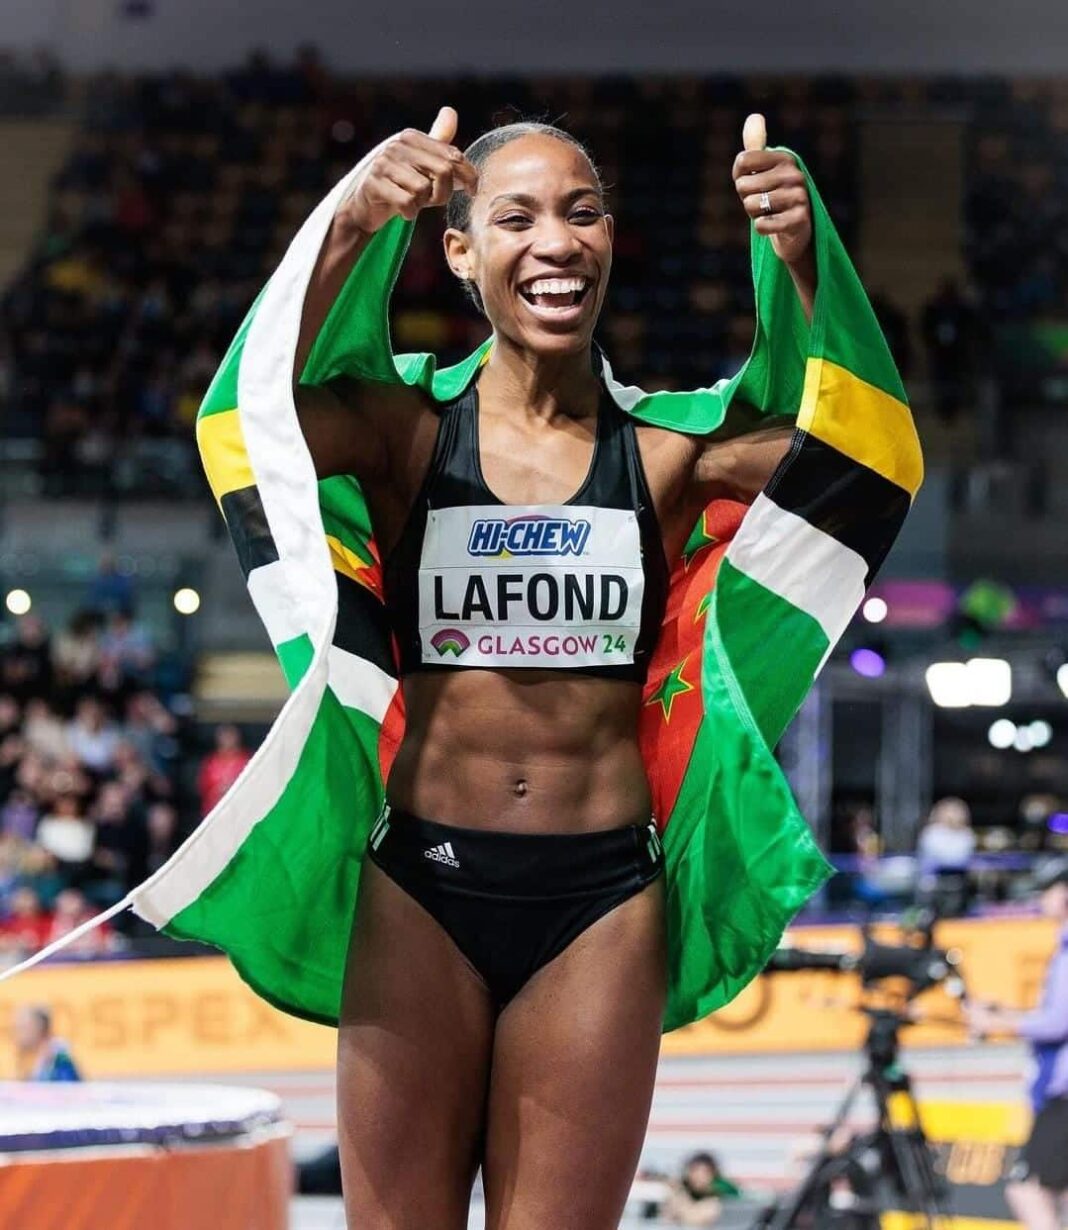 Athlete Lafond received an appreciation from other leaders of the Caribbean Nations. The Deputy Prime Minister of Saint Lucia, Ernest Hilaire, extended a greeting to Lafond for her achievement